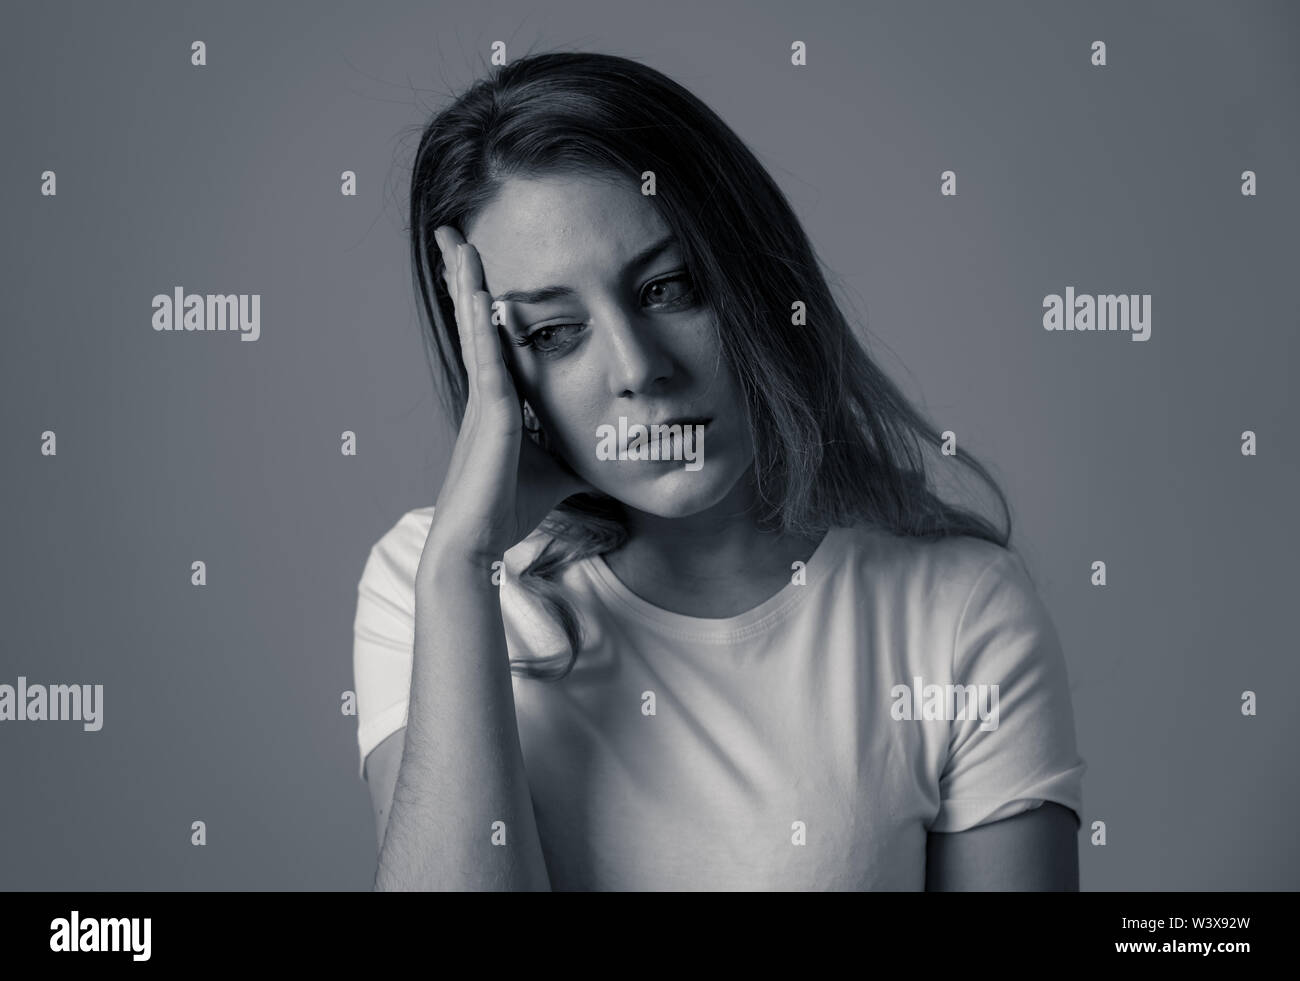 Free Photos - In This Stock Photo, A Young Woman With A Melancholic  Expression Is Standing Next To An Old, Dusty Microwave Oven In A Dimly Lit  Room. The Woman Seems To